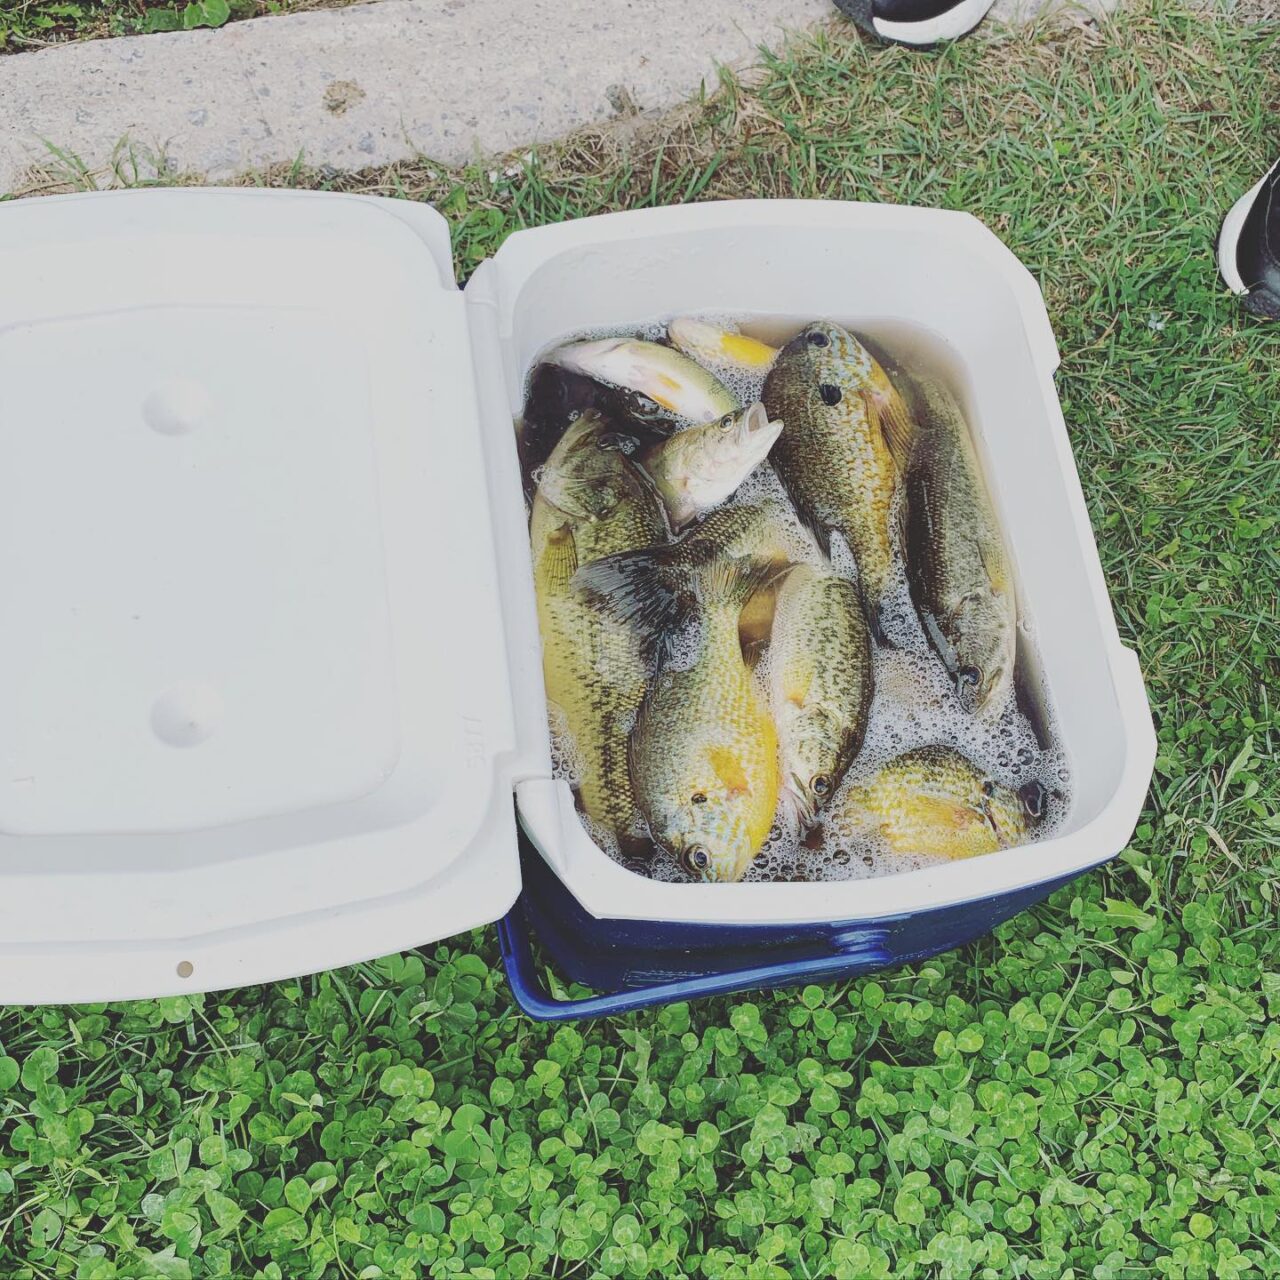 cooler with fish on the grass